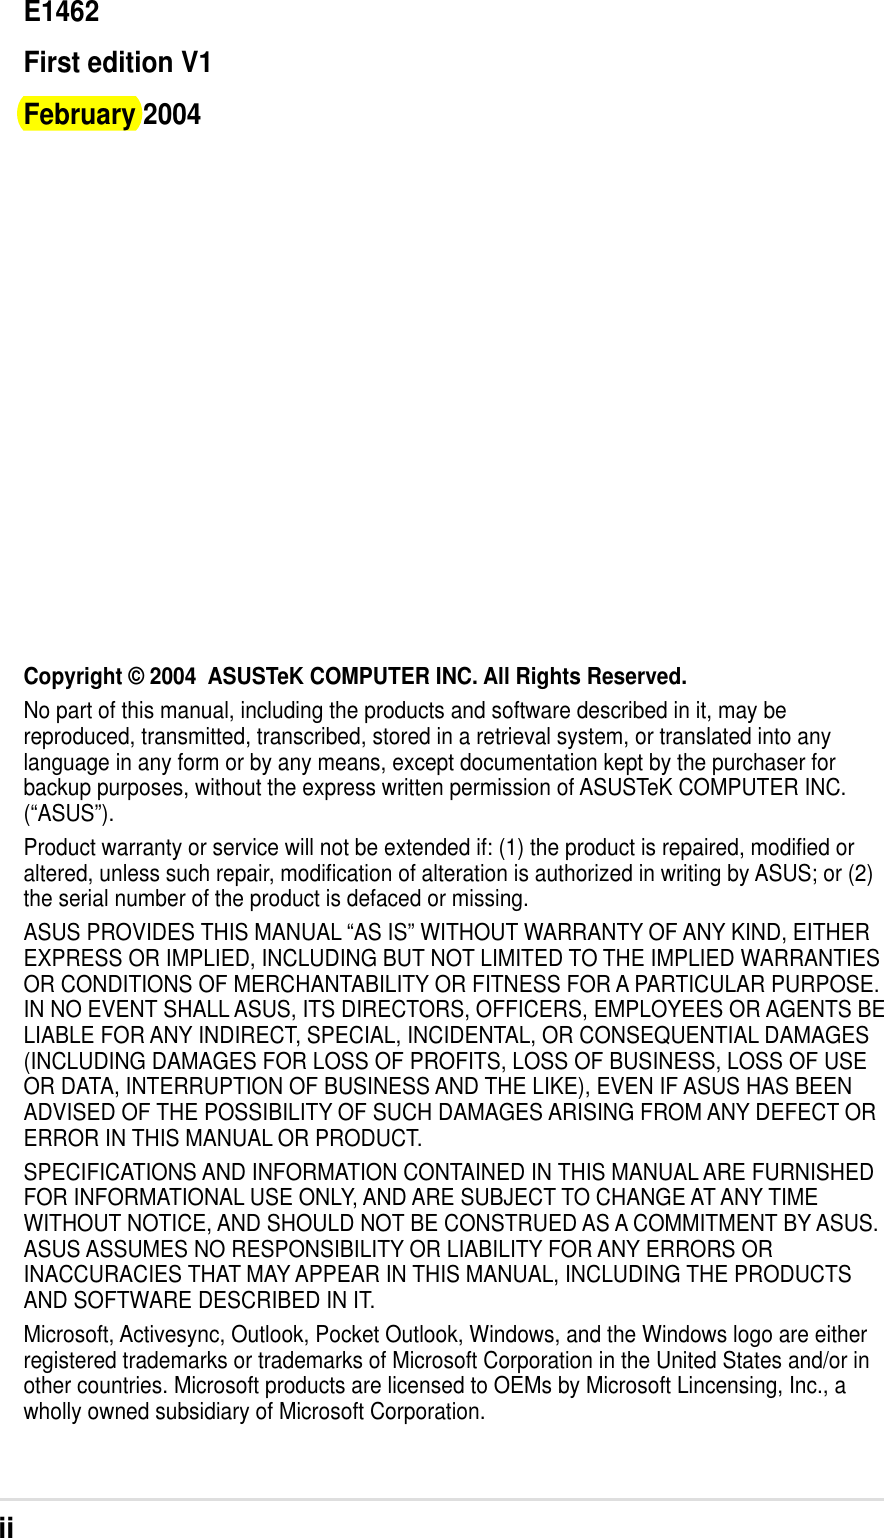 iiCopyright © 2004  ASUSTeK COMPUTER INC. All Rights Reserved.No part of this manual, including the products and software described in it, may bereproduced, transmitted, transcribed, stored in a retrieval system, or translated into anylanguage in any form or by any means, except documentation kept by the purchaser forbackup purposes, without the express written permission of ASUSTeK COMPUTER INC.(“ASUS”).Product warranty or service will not be extended if: (1) the product is repaired, modified oraltered, unless such repair, modification of alteration is authorized in writing by ASUS; or (2)the serial number of the product is defaced or missing.ASUS PROVIDES THIS MANUAL “AS IS” WITHOUT WARRANTY OF ANY KIND, EITHEREXPRESS OR IMPLIED, INCLUDING BUT NOT LIMITED TO THE IMPLIED WARRANTIESOR CONDITIONS OF MERCHANTABILITY OR FITNESS FOR A PARTICULAR PURPOSE.IN NO EVENT SHALL ASUS, ITS DIRECTORS, OFFICERS, EMPLOYEES OR AGENTS BELIABLE FOR ANY INDIRECT, SPECIAL, INCIDENTAL, OR CONSEQUENTIAL DAMAGES(INCLUDING DAMAGES FOR LOSS OF PROFITS, LOSS OF BUSINESS, LOSS OF USEOR DATA, INTERRUPTION OF BUSINESS AND THE LIKE), EVEN IF ASUS HAS BEENADVISED OF THE POSSIBILITY OF SUCH DAMAGES ARISING FROM ANY DEFECT ORERROR IN THIS MANUAL OR PRODUCT.SPECIFICATIONS AND INFORMATION CONTAINED IN THIS MANUAL ARE FURNISHEDFOR INFORMATIONAL USE ONLY, AND ARE SUBJECT TO CHANGE AT ANY TIMEWITHOUT NOTICE, AND SHOULD NOT BE CONSTRUED AS A COMMITMENT BY ASUS.ASUS ASSUMES NO RESPONSIBILITY OR LIABILITY FOR ANY ERRORS ORINACCURACIES THAT MAY APPEAR IN THIS MANUAL, INCLUDING THE PRODUCTSAND SOFTWARE DESCRIBED IN IT.Microsoft, Activesync, Outlook, Pocket Outlook, Windows, and the Windows logo are eitherregistered trademarks or trademarks of Microsoft Corporation in the United States and/or inother countries. Microsoft products are licensed to OEMs by Microsoft Lincensing, Inc., awholly owned subsidiary of Microsoft Corporation.E1462First edition V1February 2004